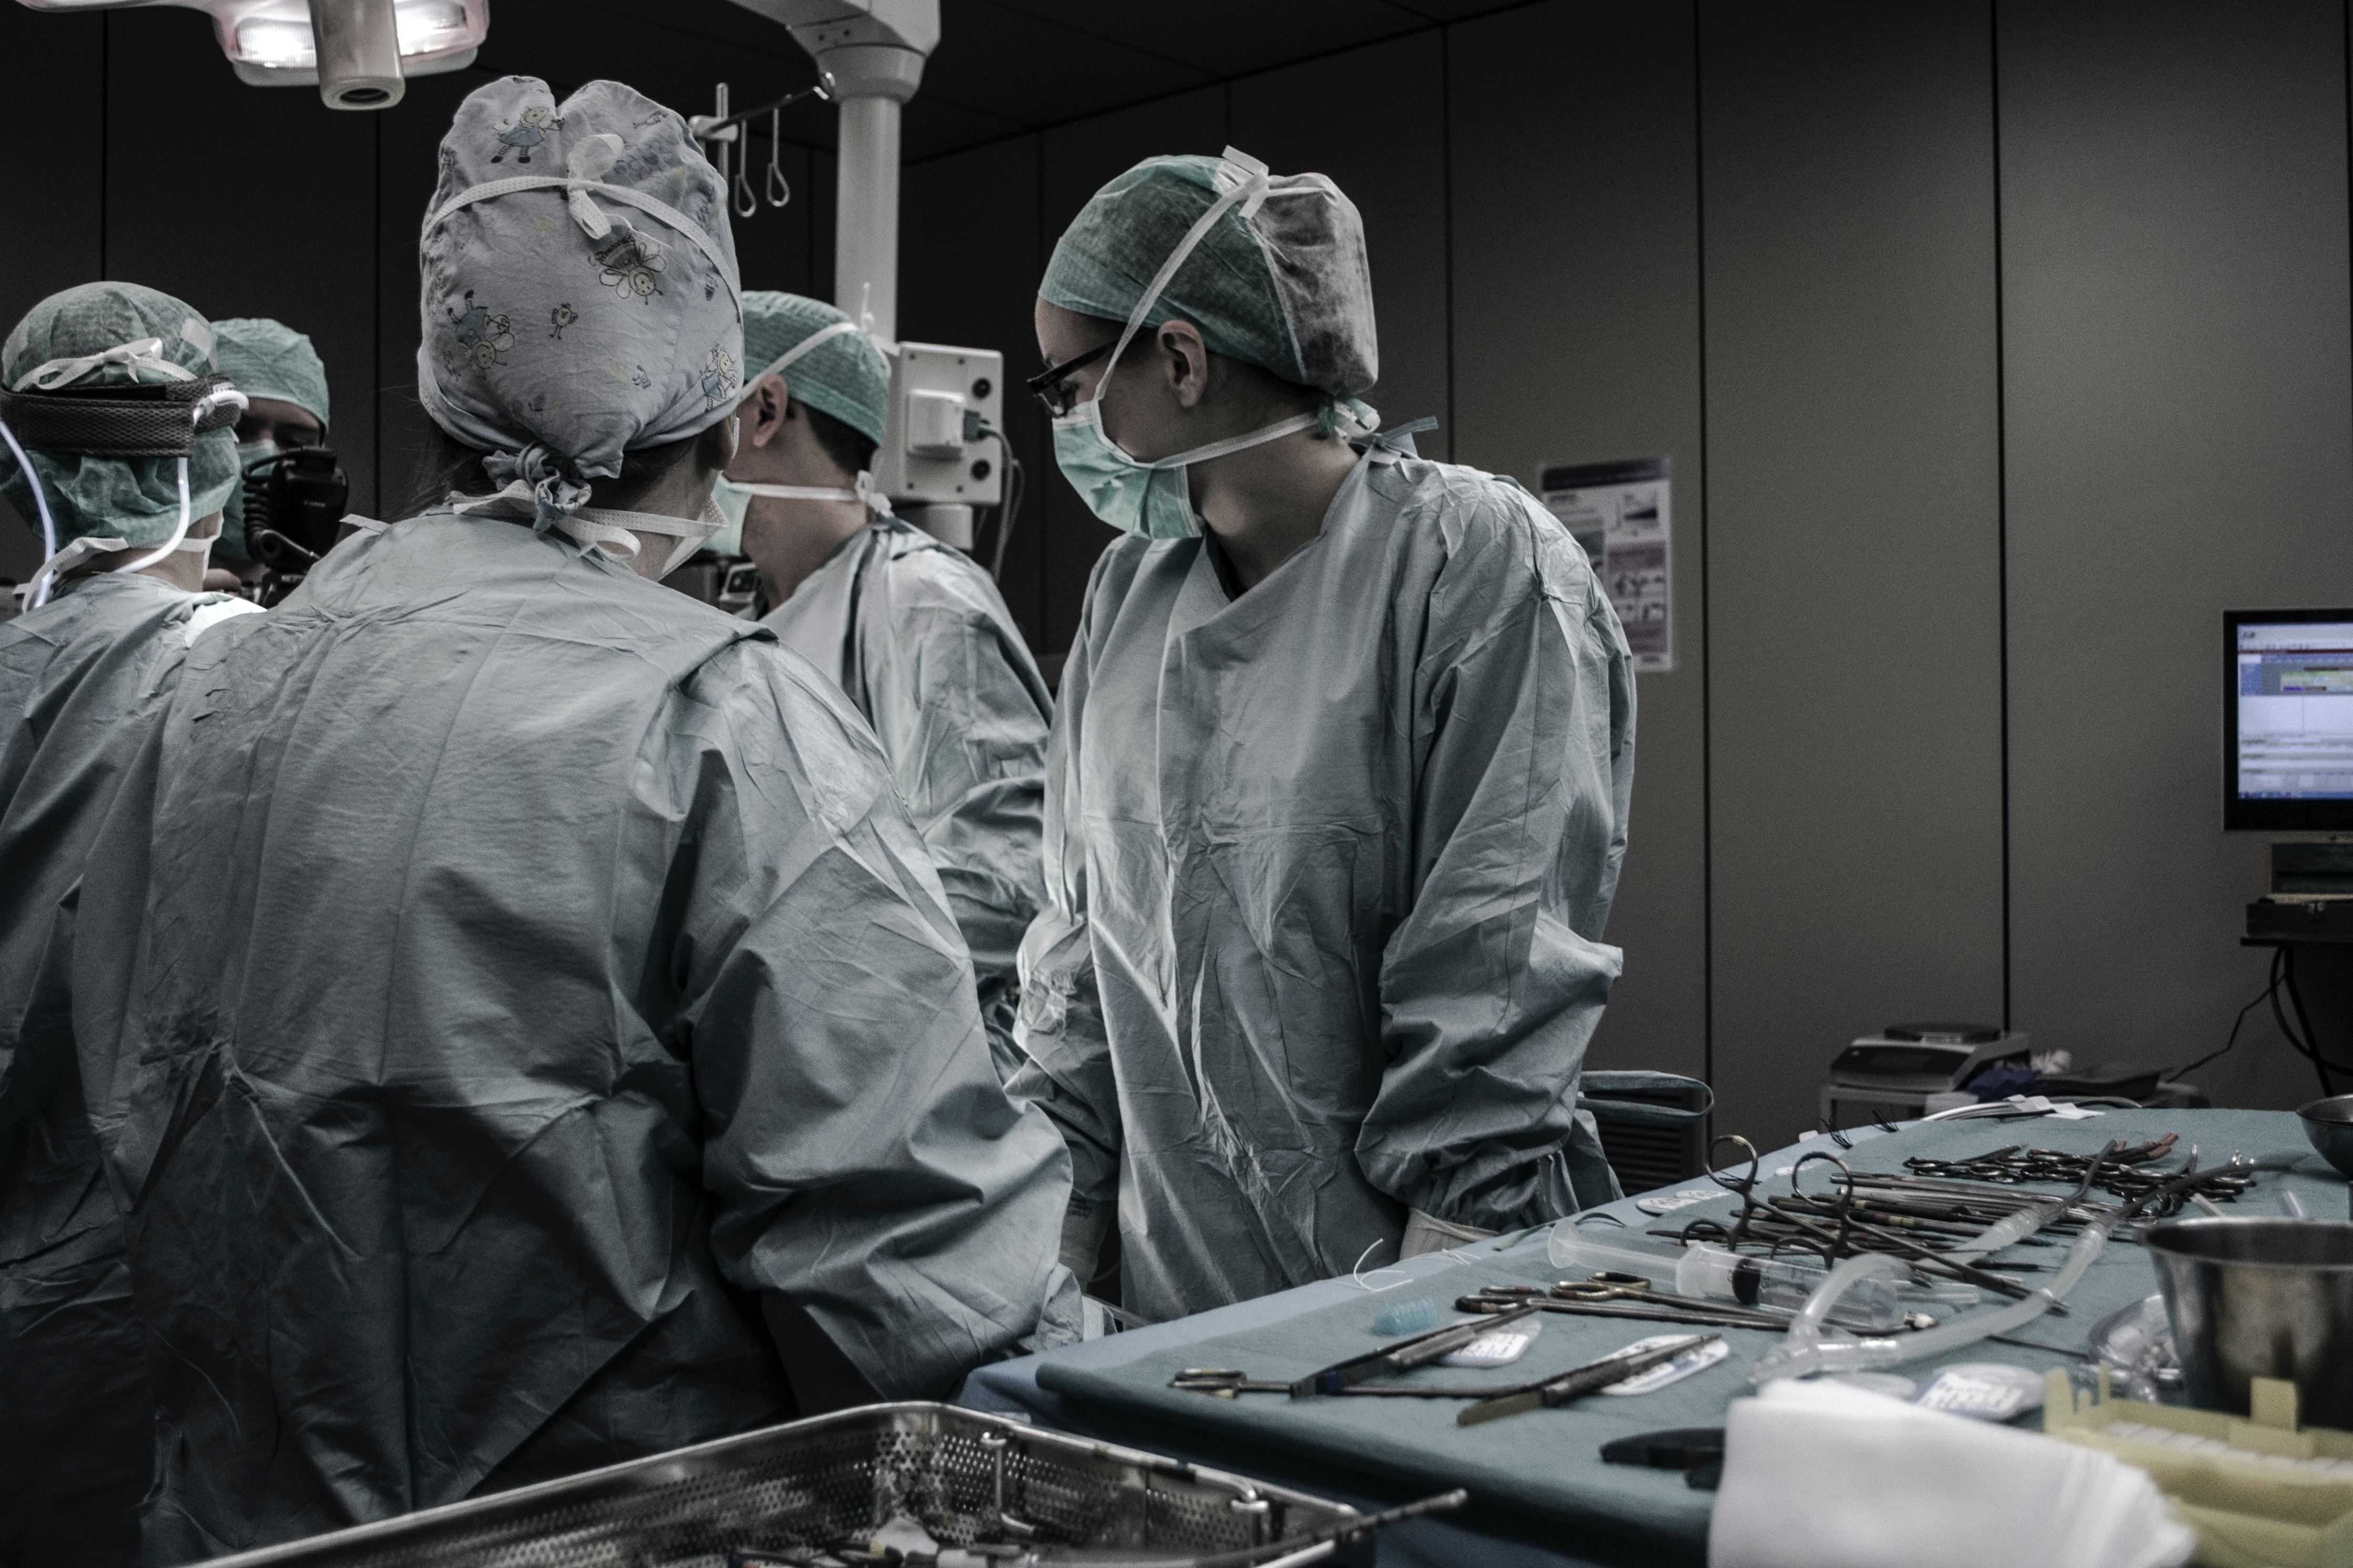 Medical professionals in surgical clothing